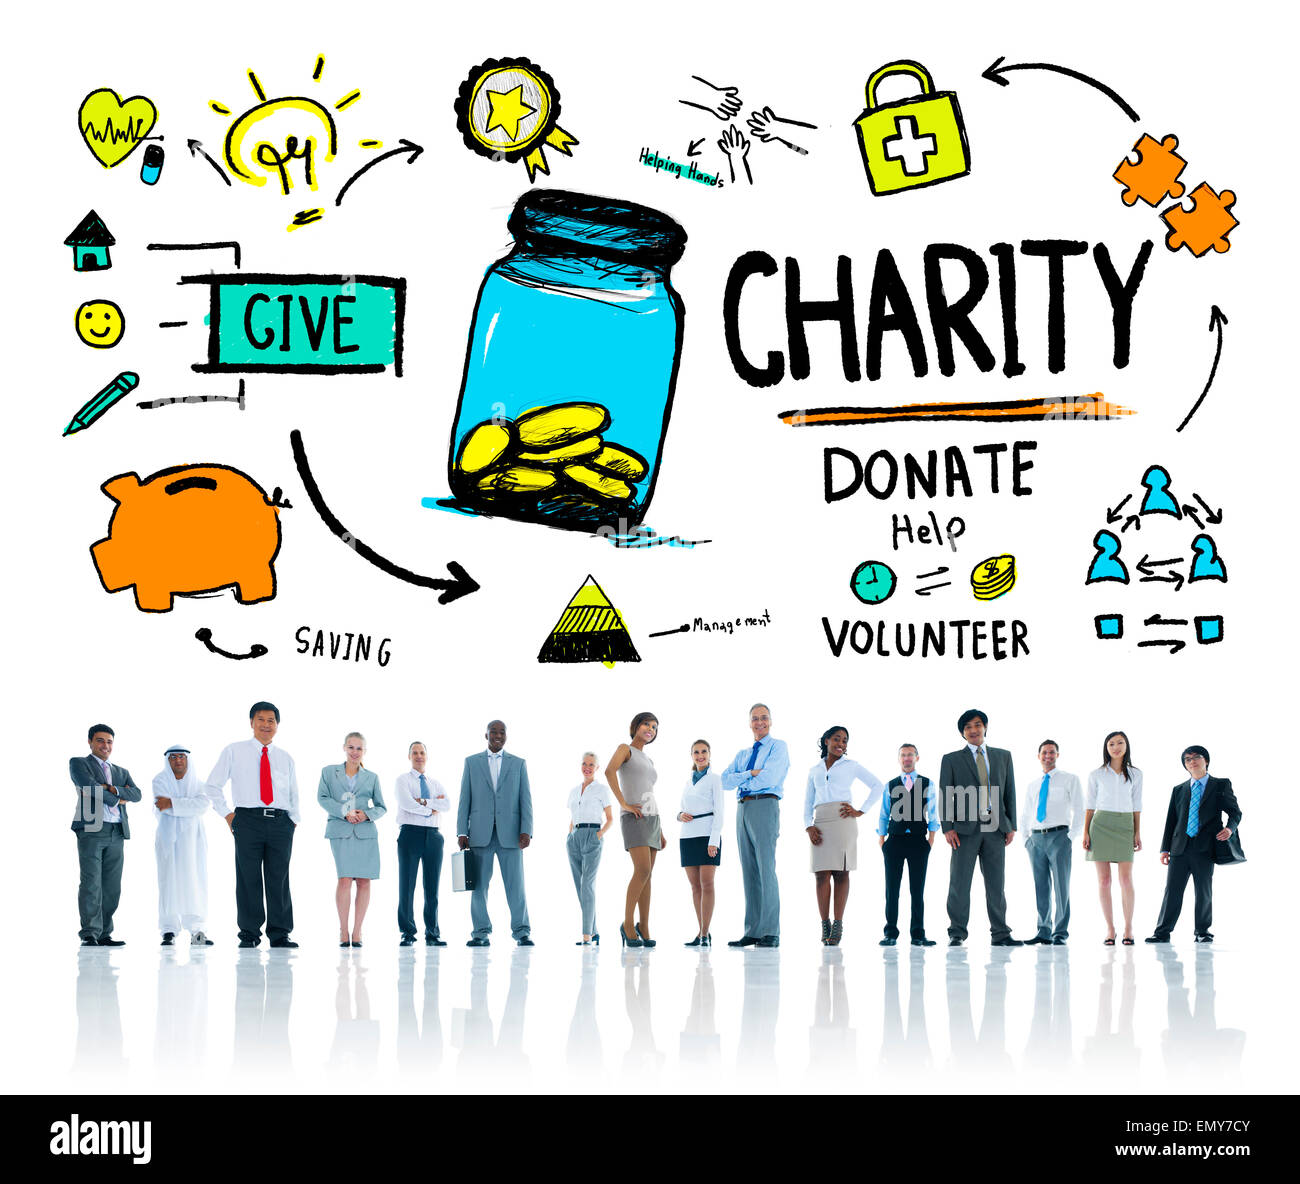 Conceptual Caption Please Donate. Business Concept Supply Furnish Hand Out  Contribute Grant Aid To Charity Abstract Stock Illustration - Illustration  of support, volunteer: 237641659